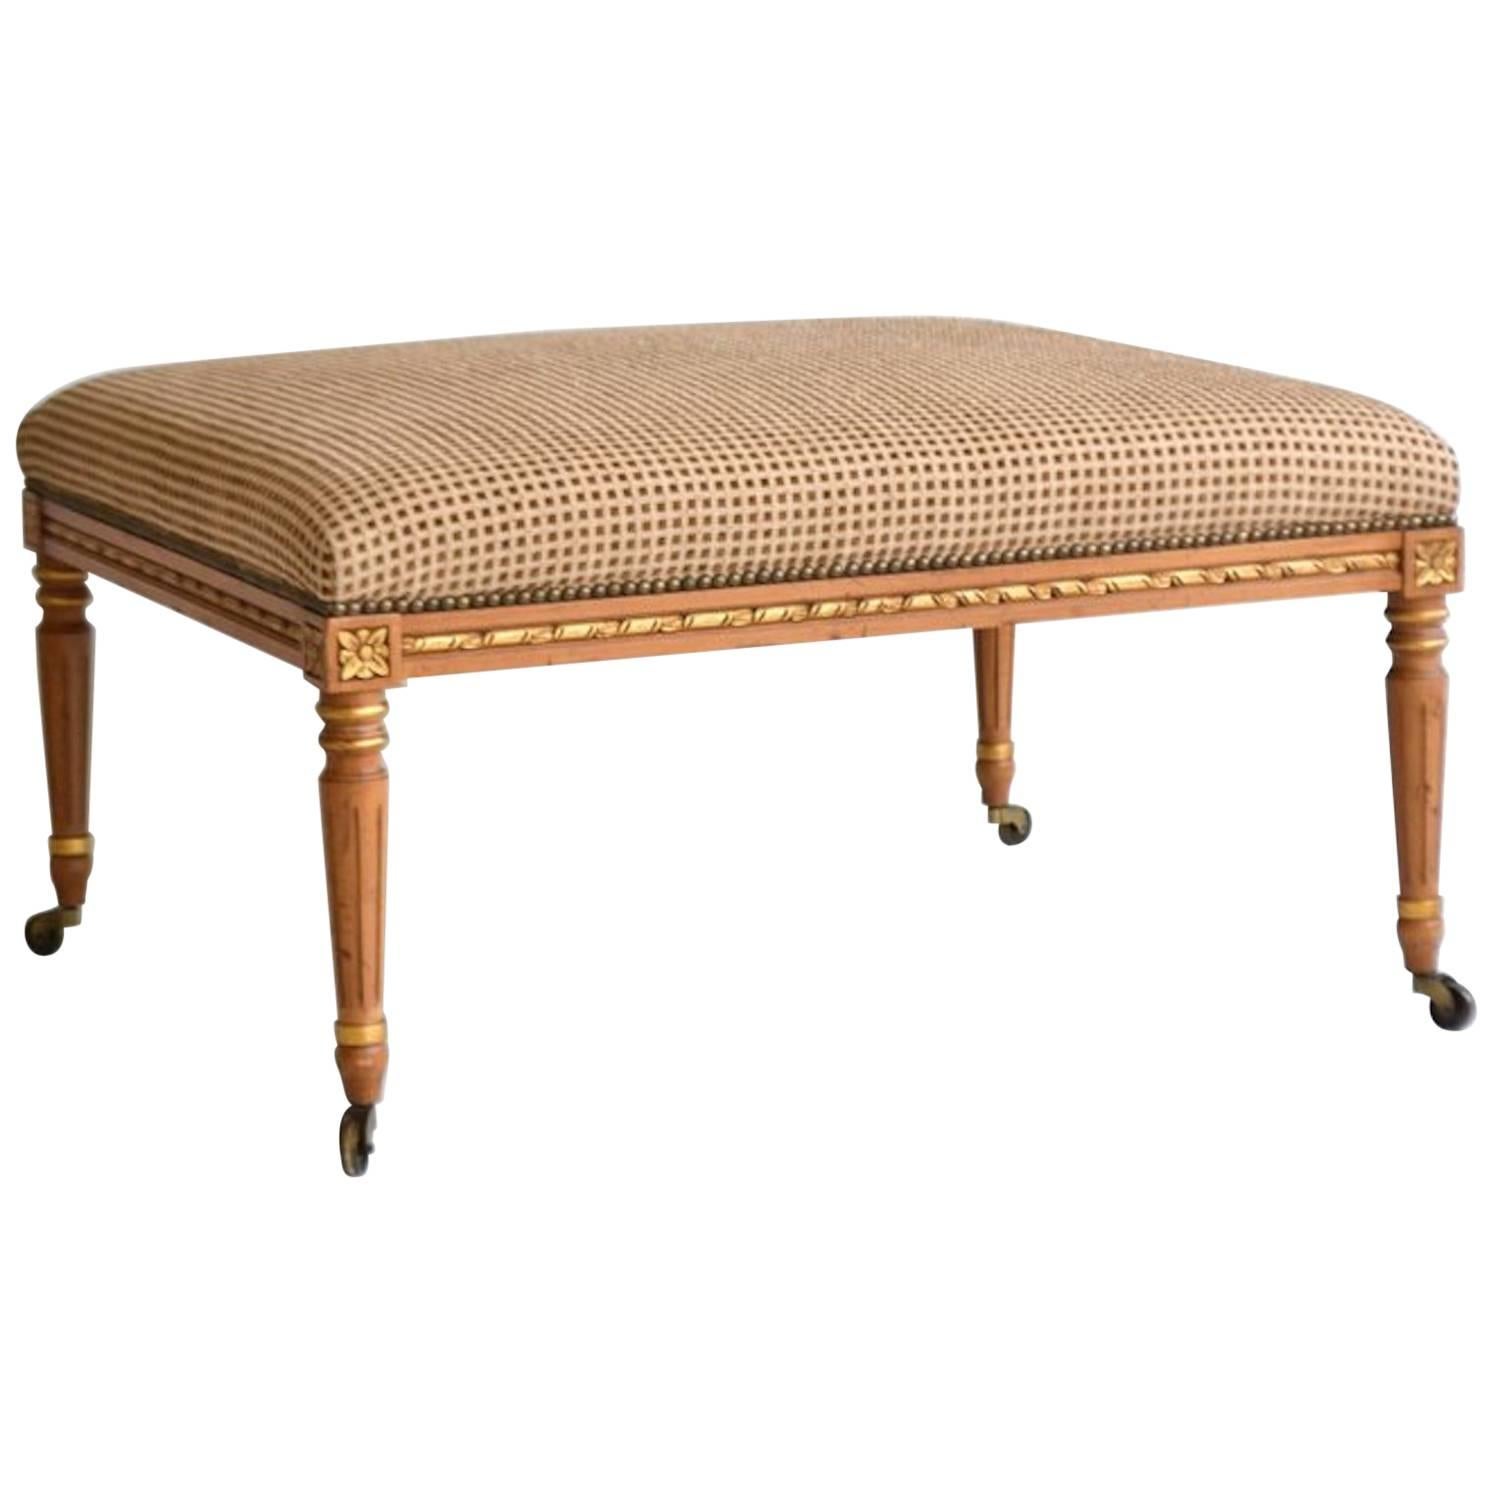 Louis XVI Style Upholstered Bench / Cocktail Table